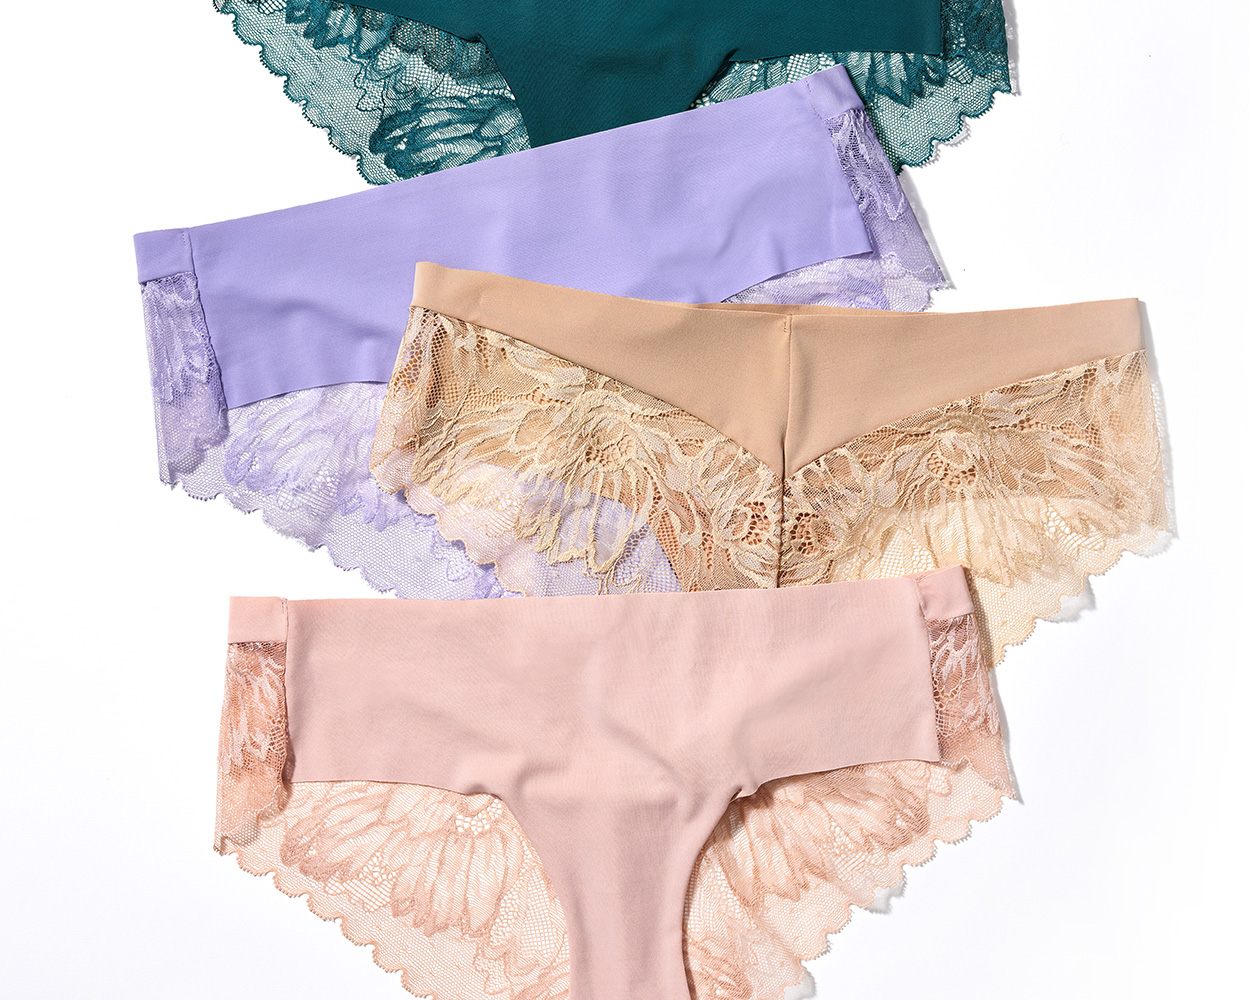 Soma<sup class=st-superscript>®</sup> laydown of lace-back hipster panties in dark blue, purple, nude, and light pink.